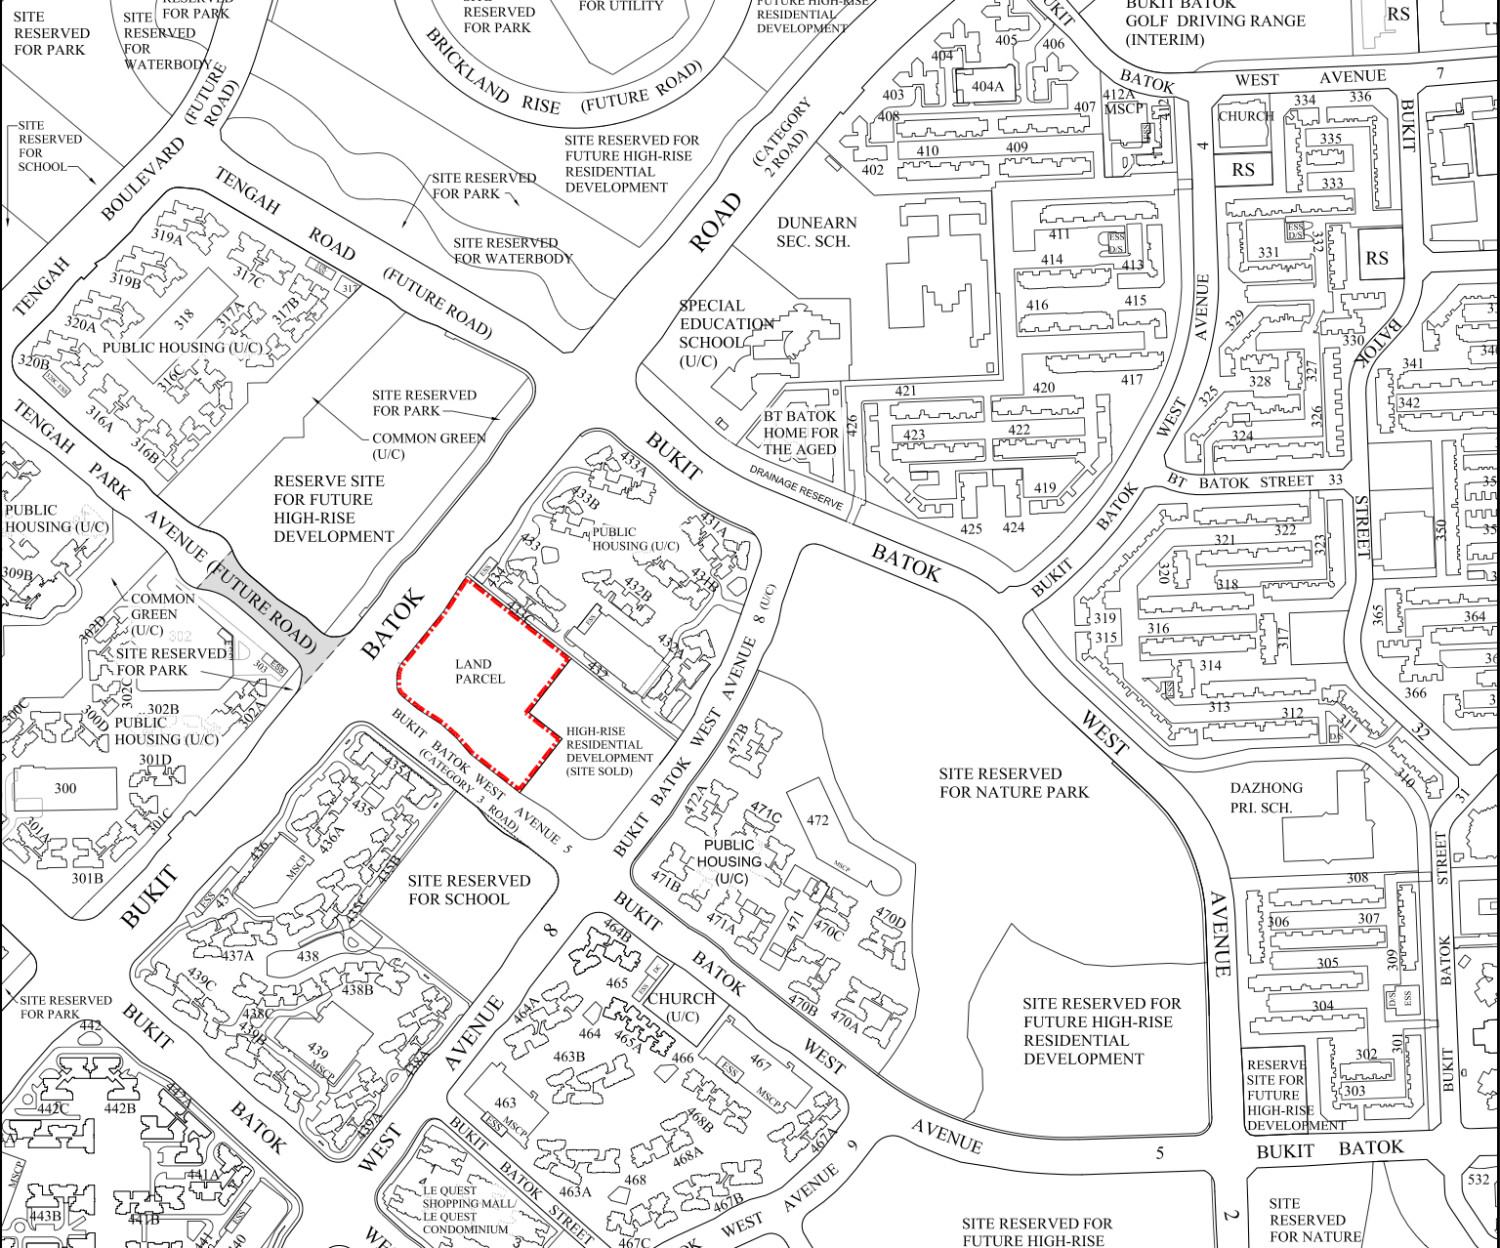 New EC site at Bukit Batok West Ave 5 launched for tender - Property News